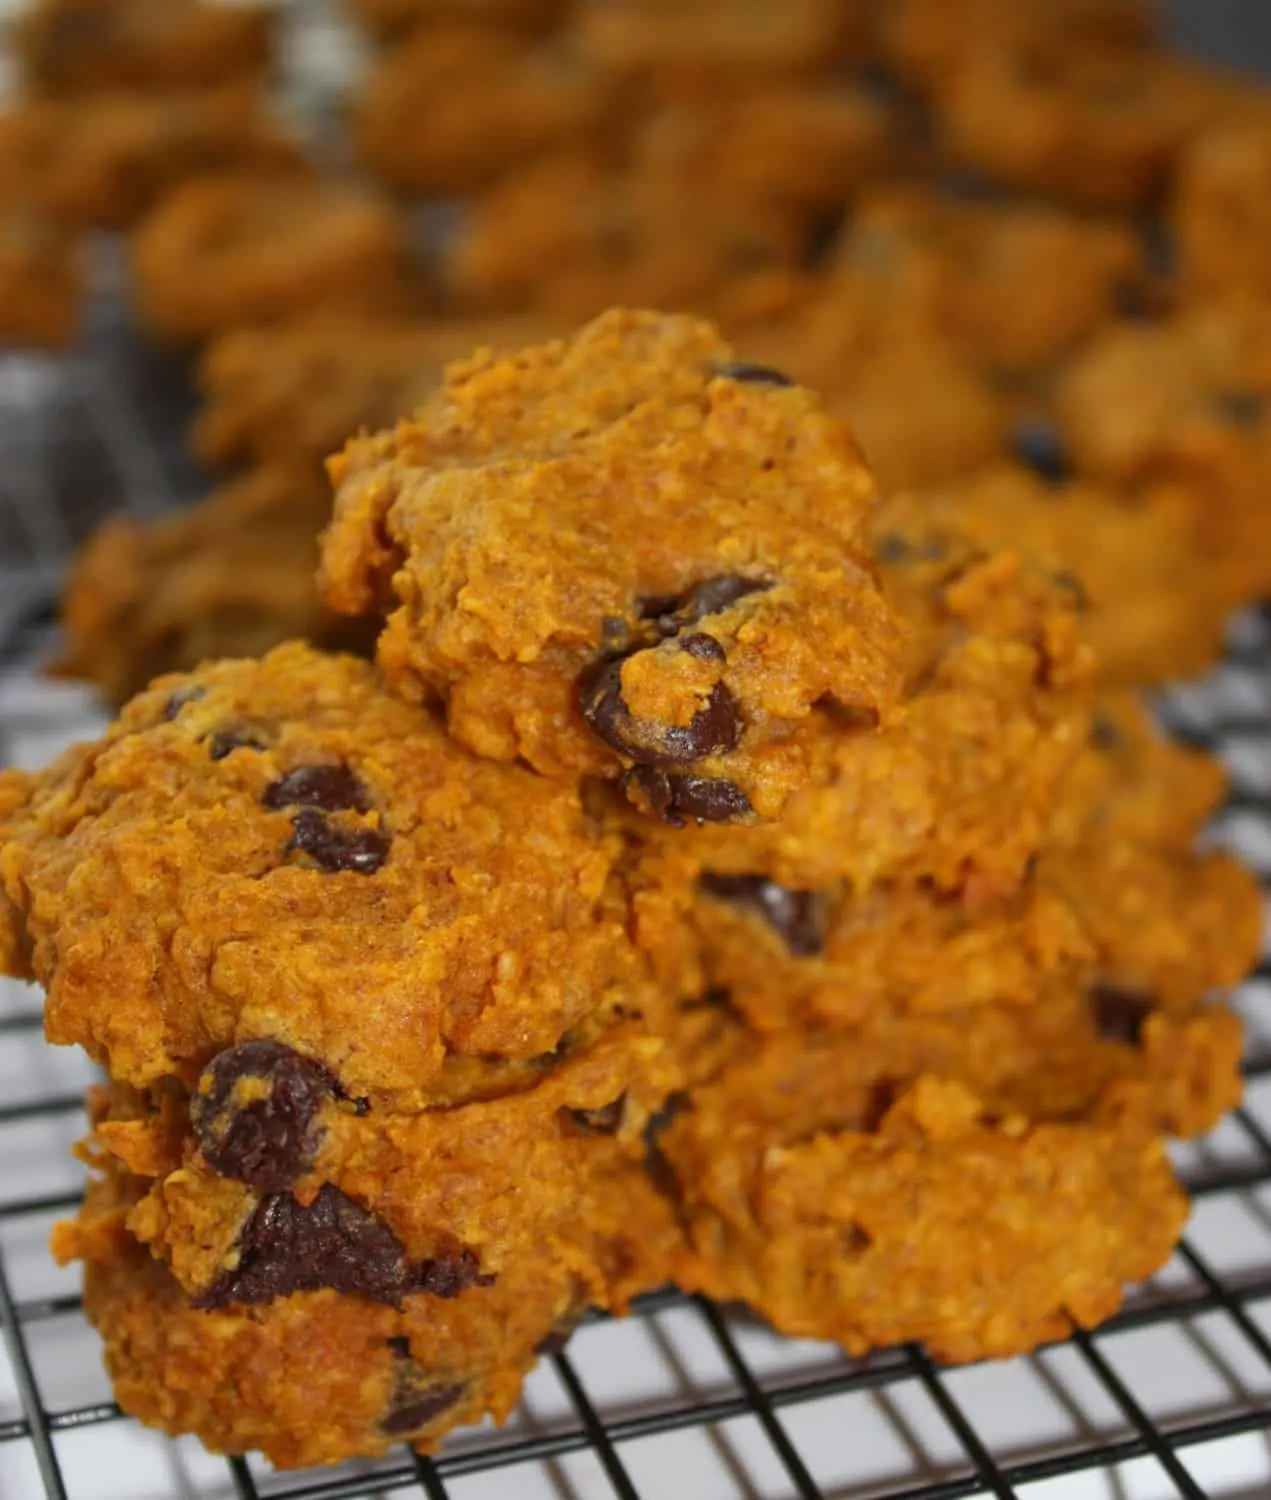 As fall rains turn to snow I am just about done with pumpkin recipes.  These Pumpkin Cookies include the flavours of fall without overdoing the sweetness.